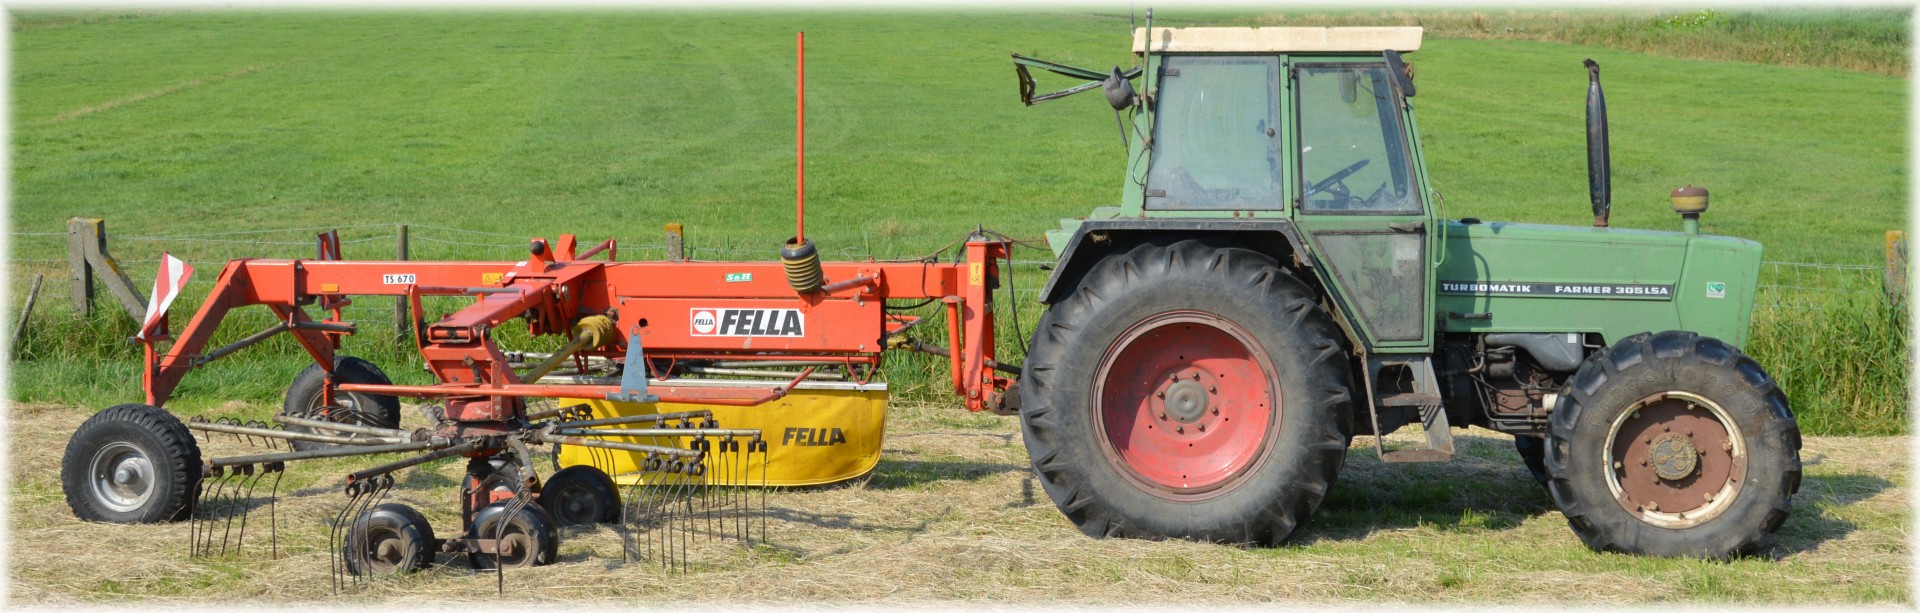 crops agricultural tools machinery free photo